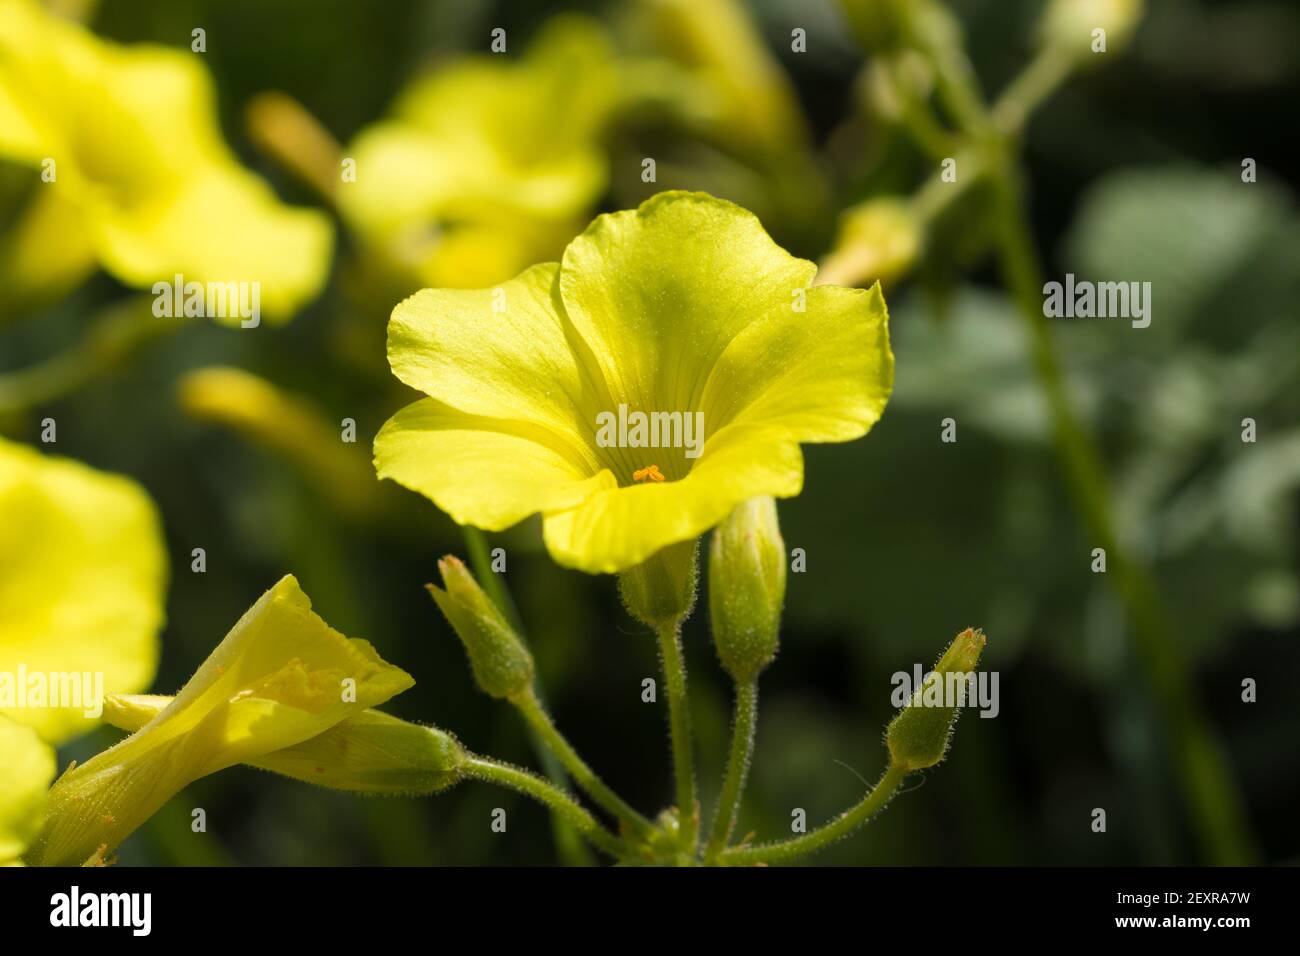 Yellow flowers of Bermuda buttercup, blurred background Stock Photo